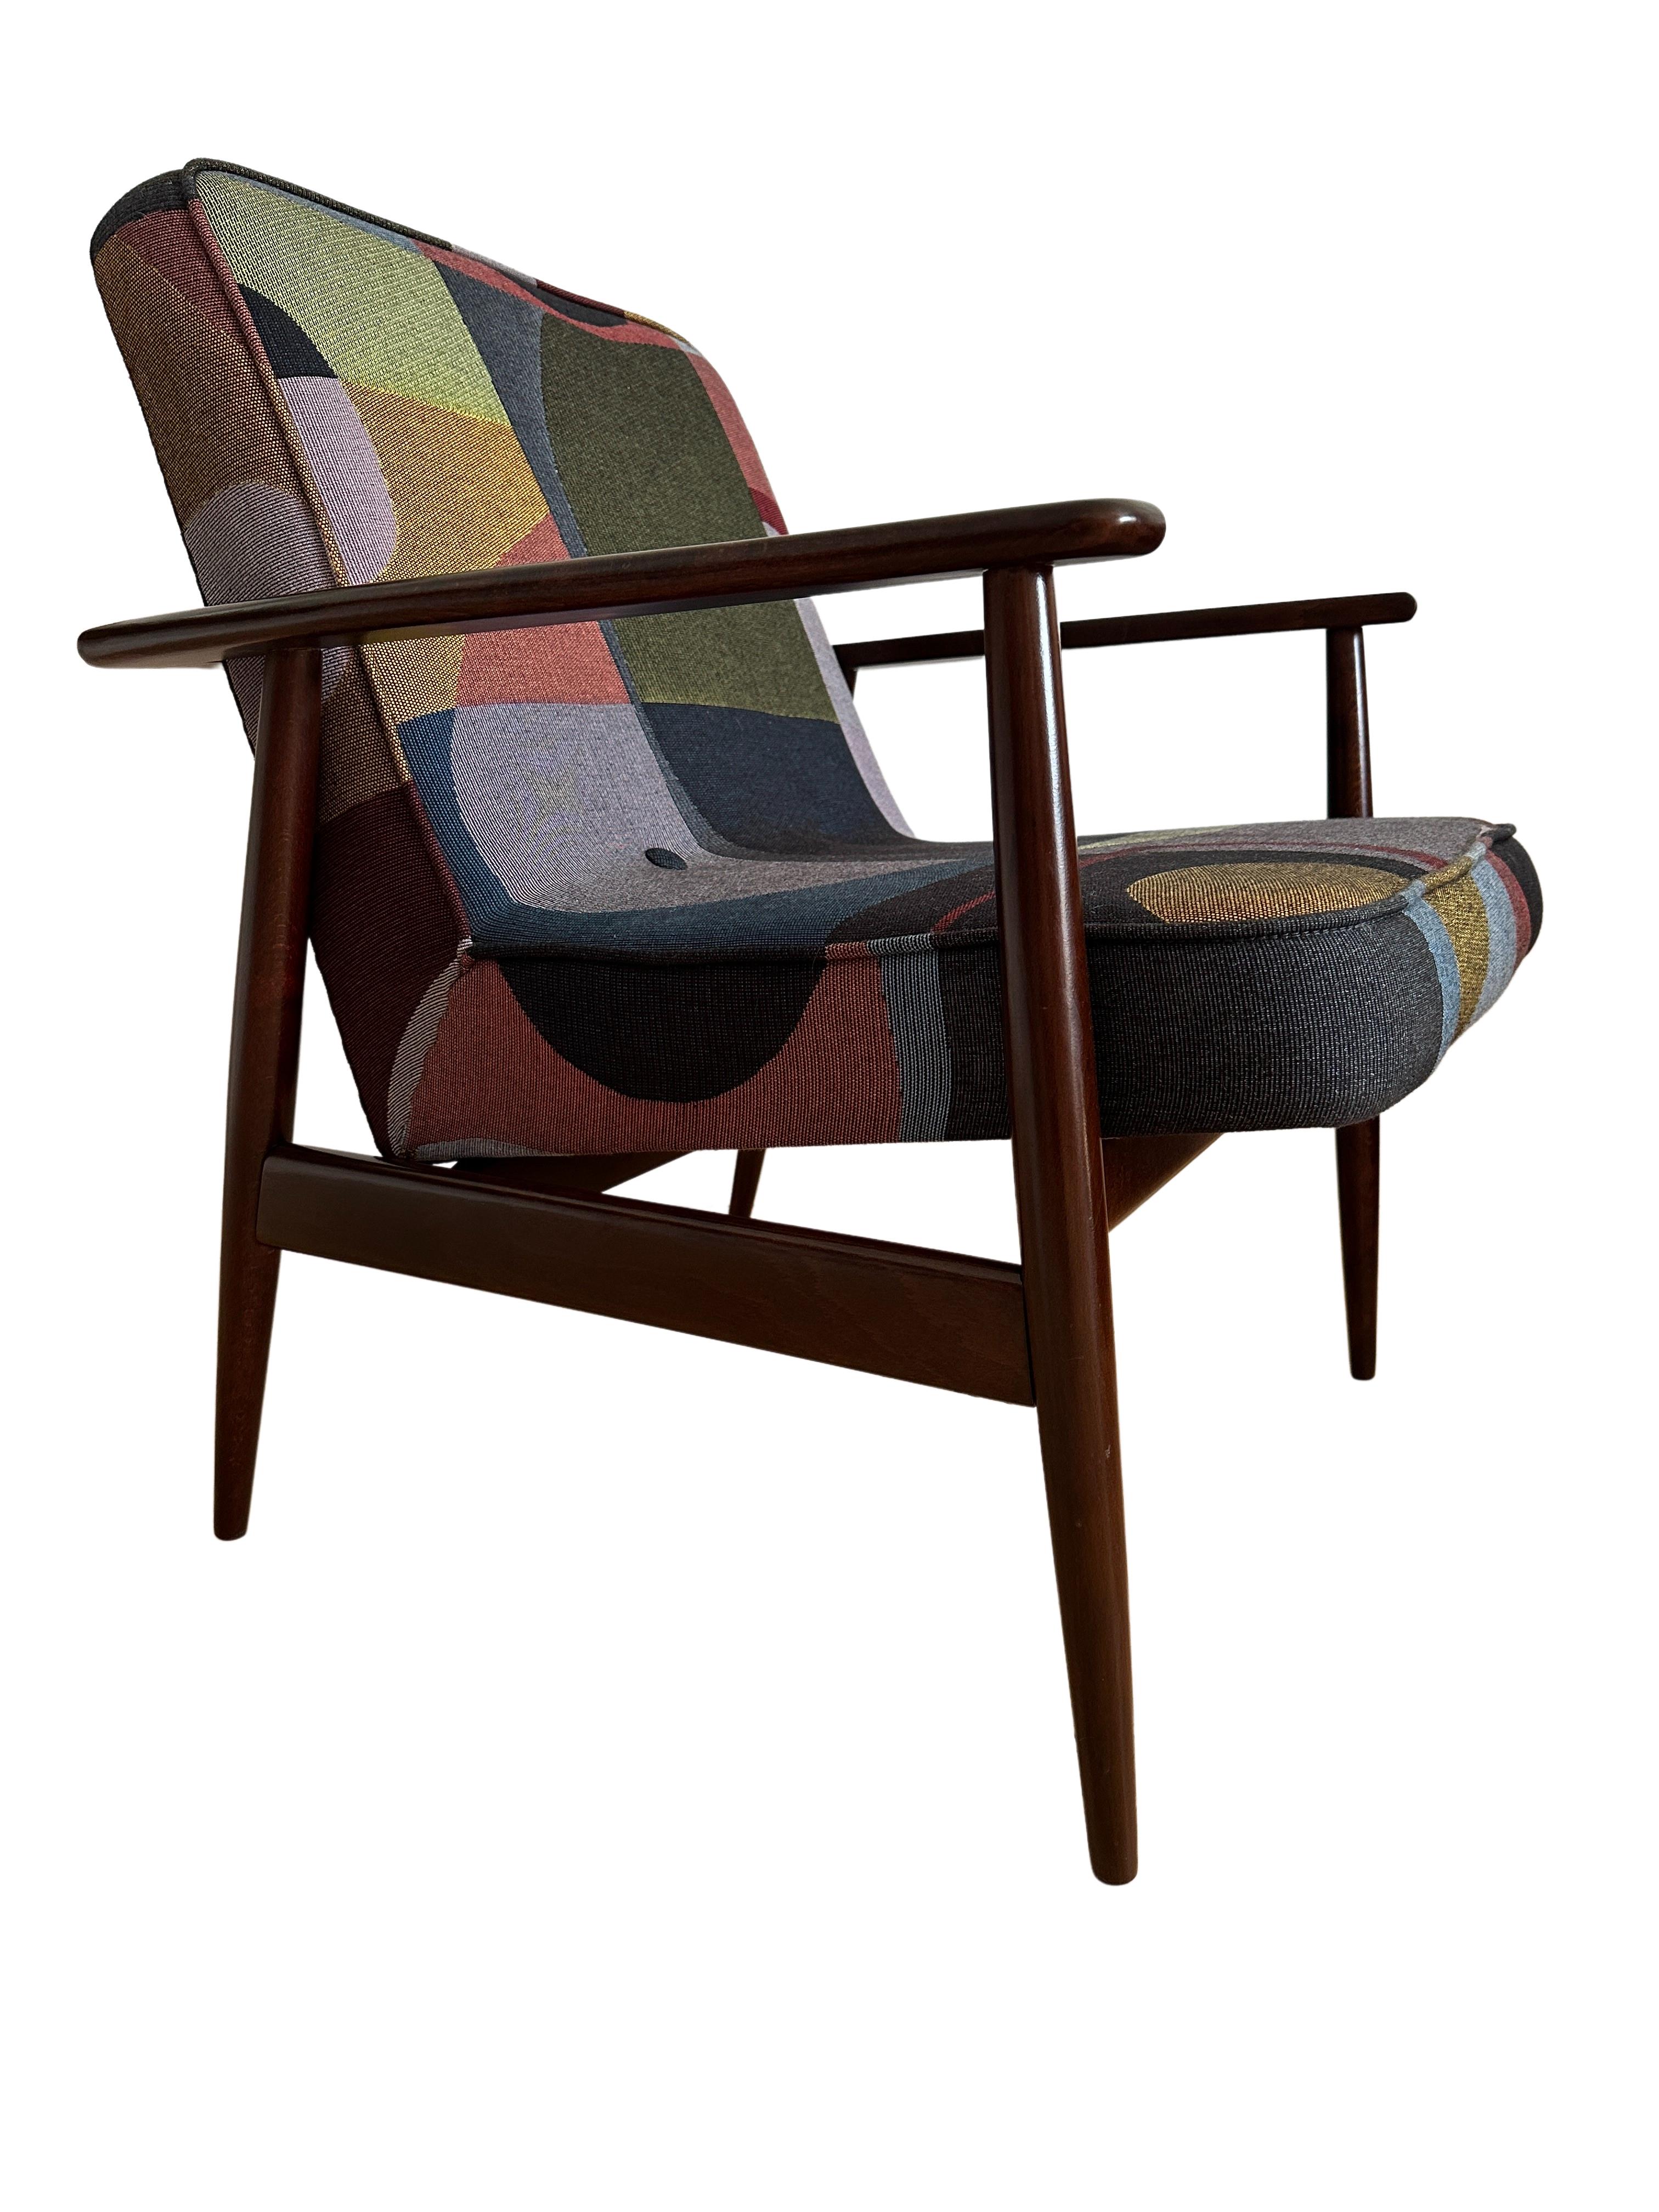 One of the icon of Polish midcentury design, very rare nowadays GFM 300-192 armchair, designed by Juliusz Kedziorek - the author of many innovative, iconic furniture designs. 

The armchair has been manufactured by Goscicinska Furniture Factory in